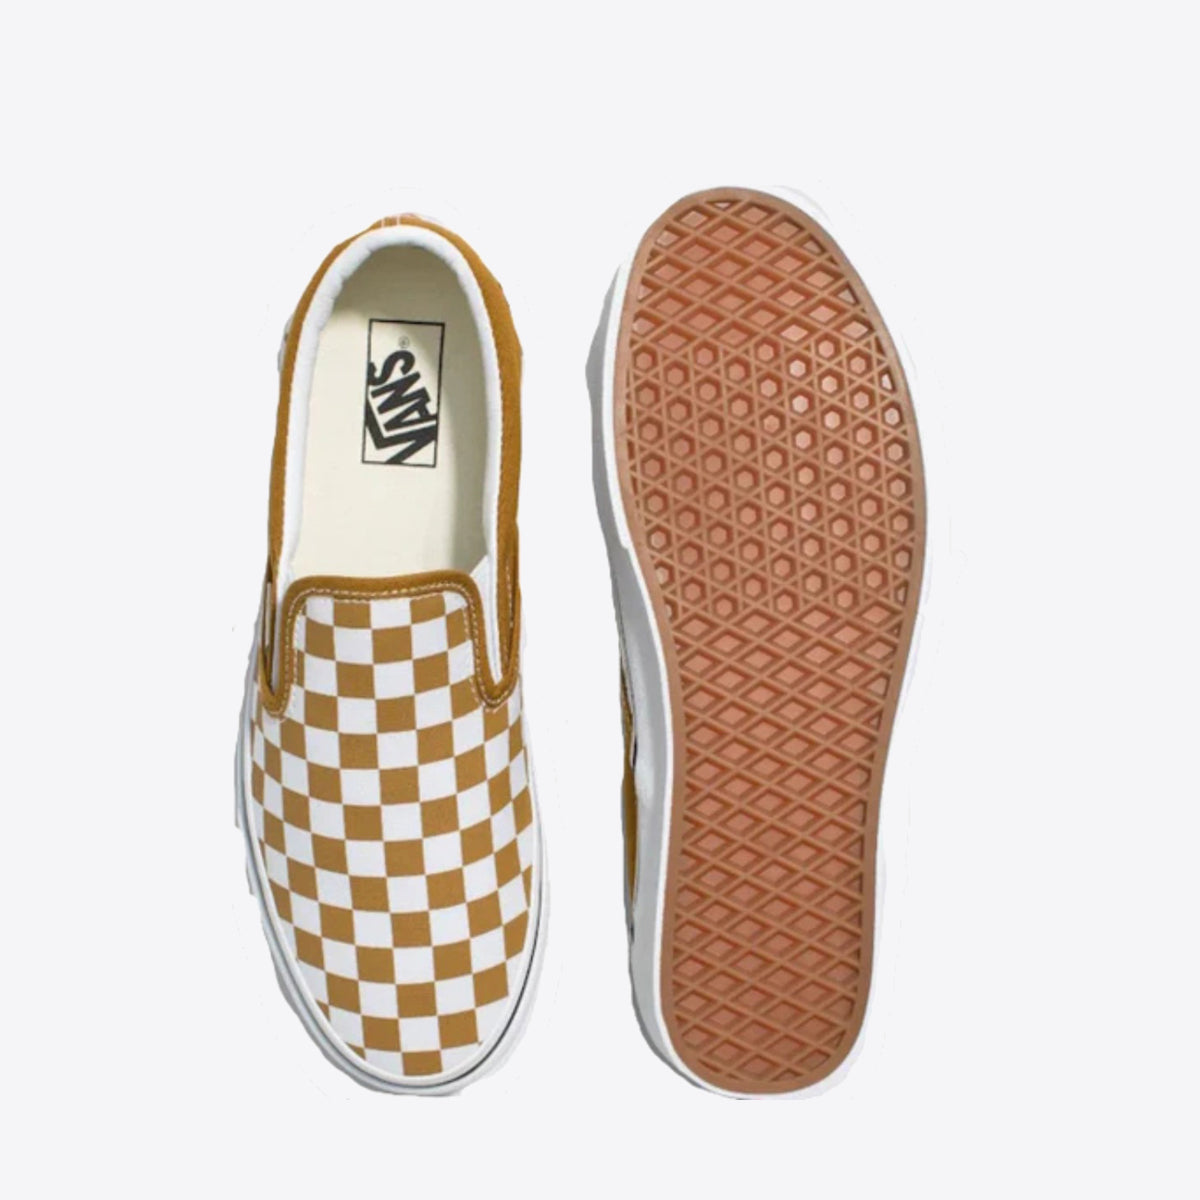 VANS Classic Checkerboard Colour Theory - Unisex Golden Brown - Image 4